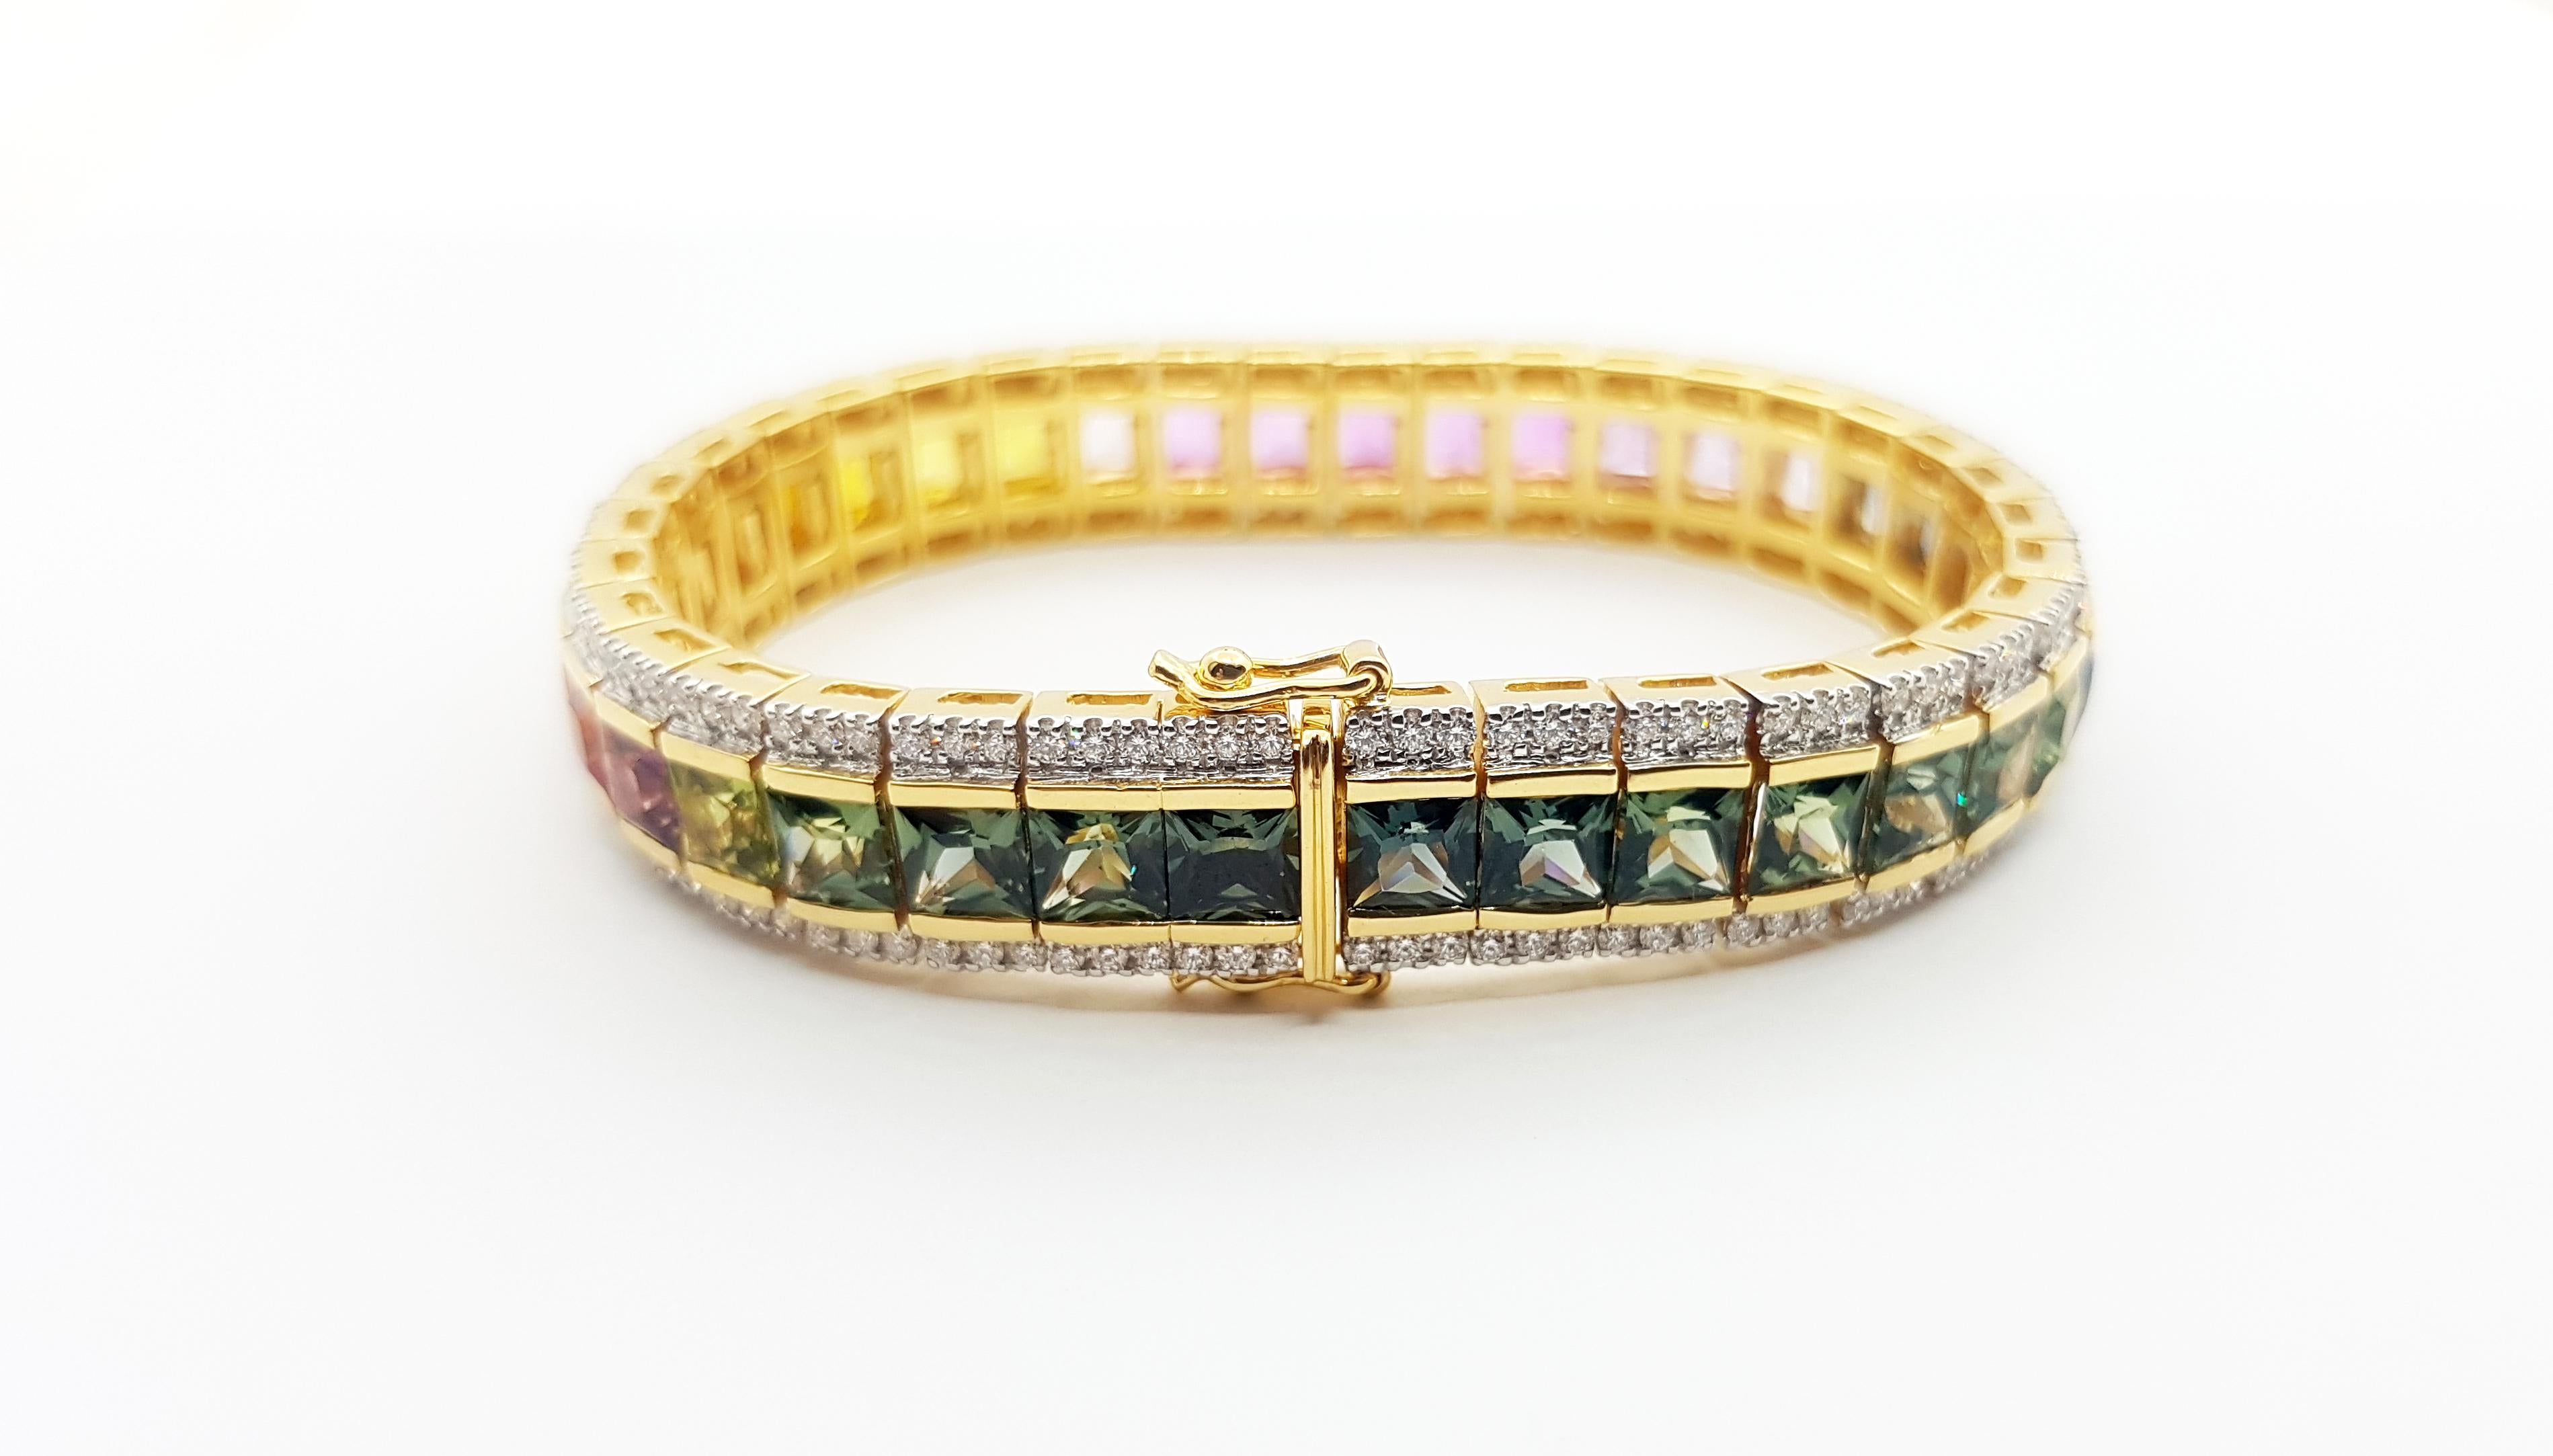 Rainbow Colour Sapphire 26.34 carats with Diamond 2.65 carats Bracelet set in 18K Gold Settings

Width:  1.1 cm 
Length: 18.0 cm
Total Weight: 61.77 grams

